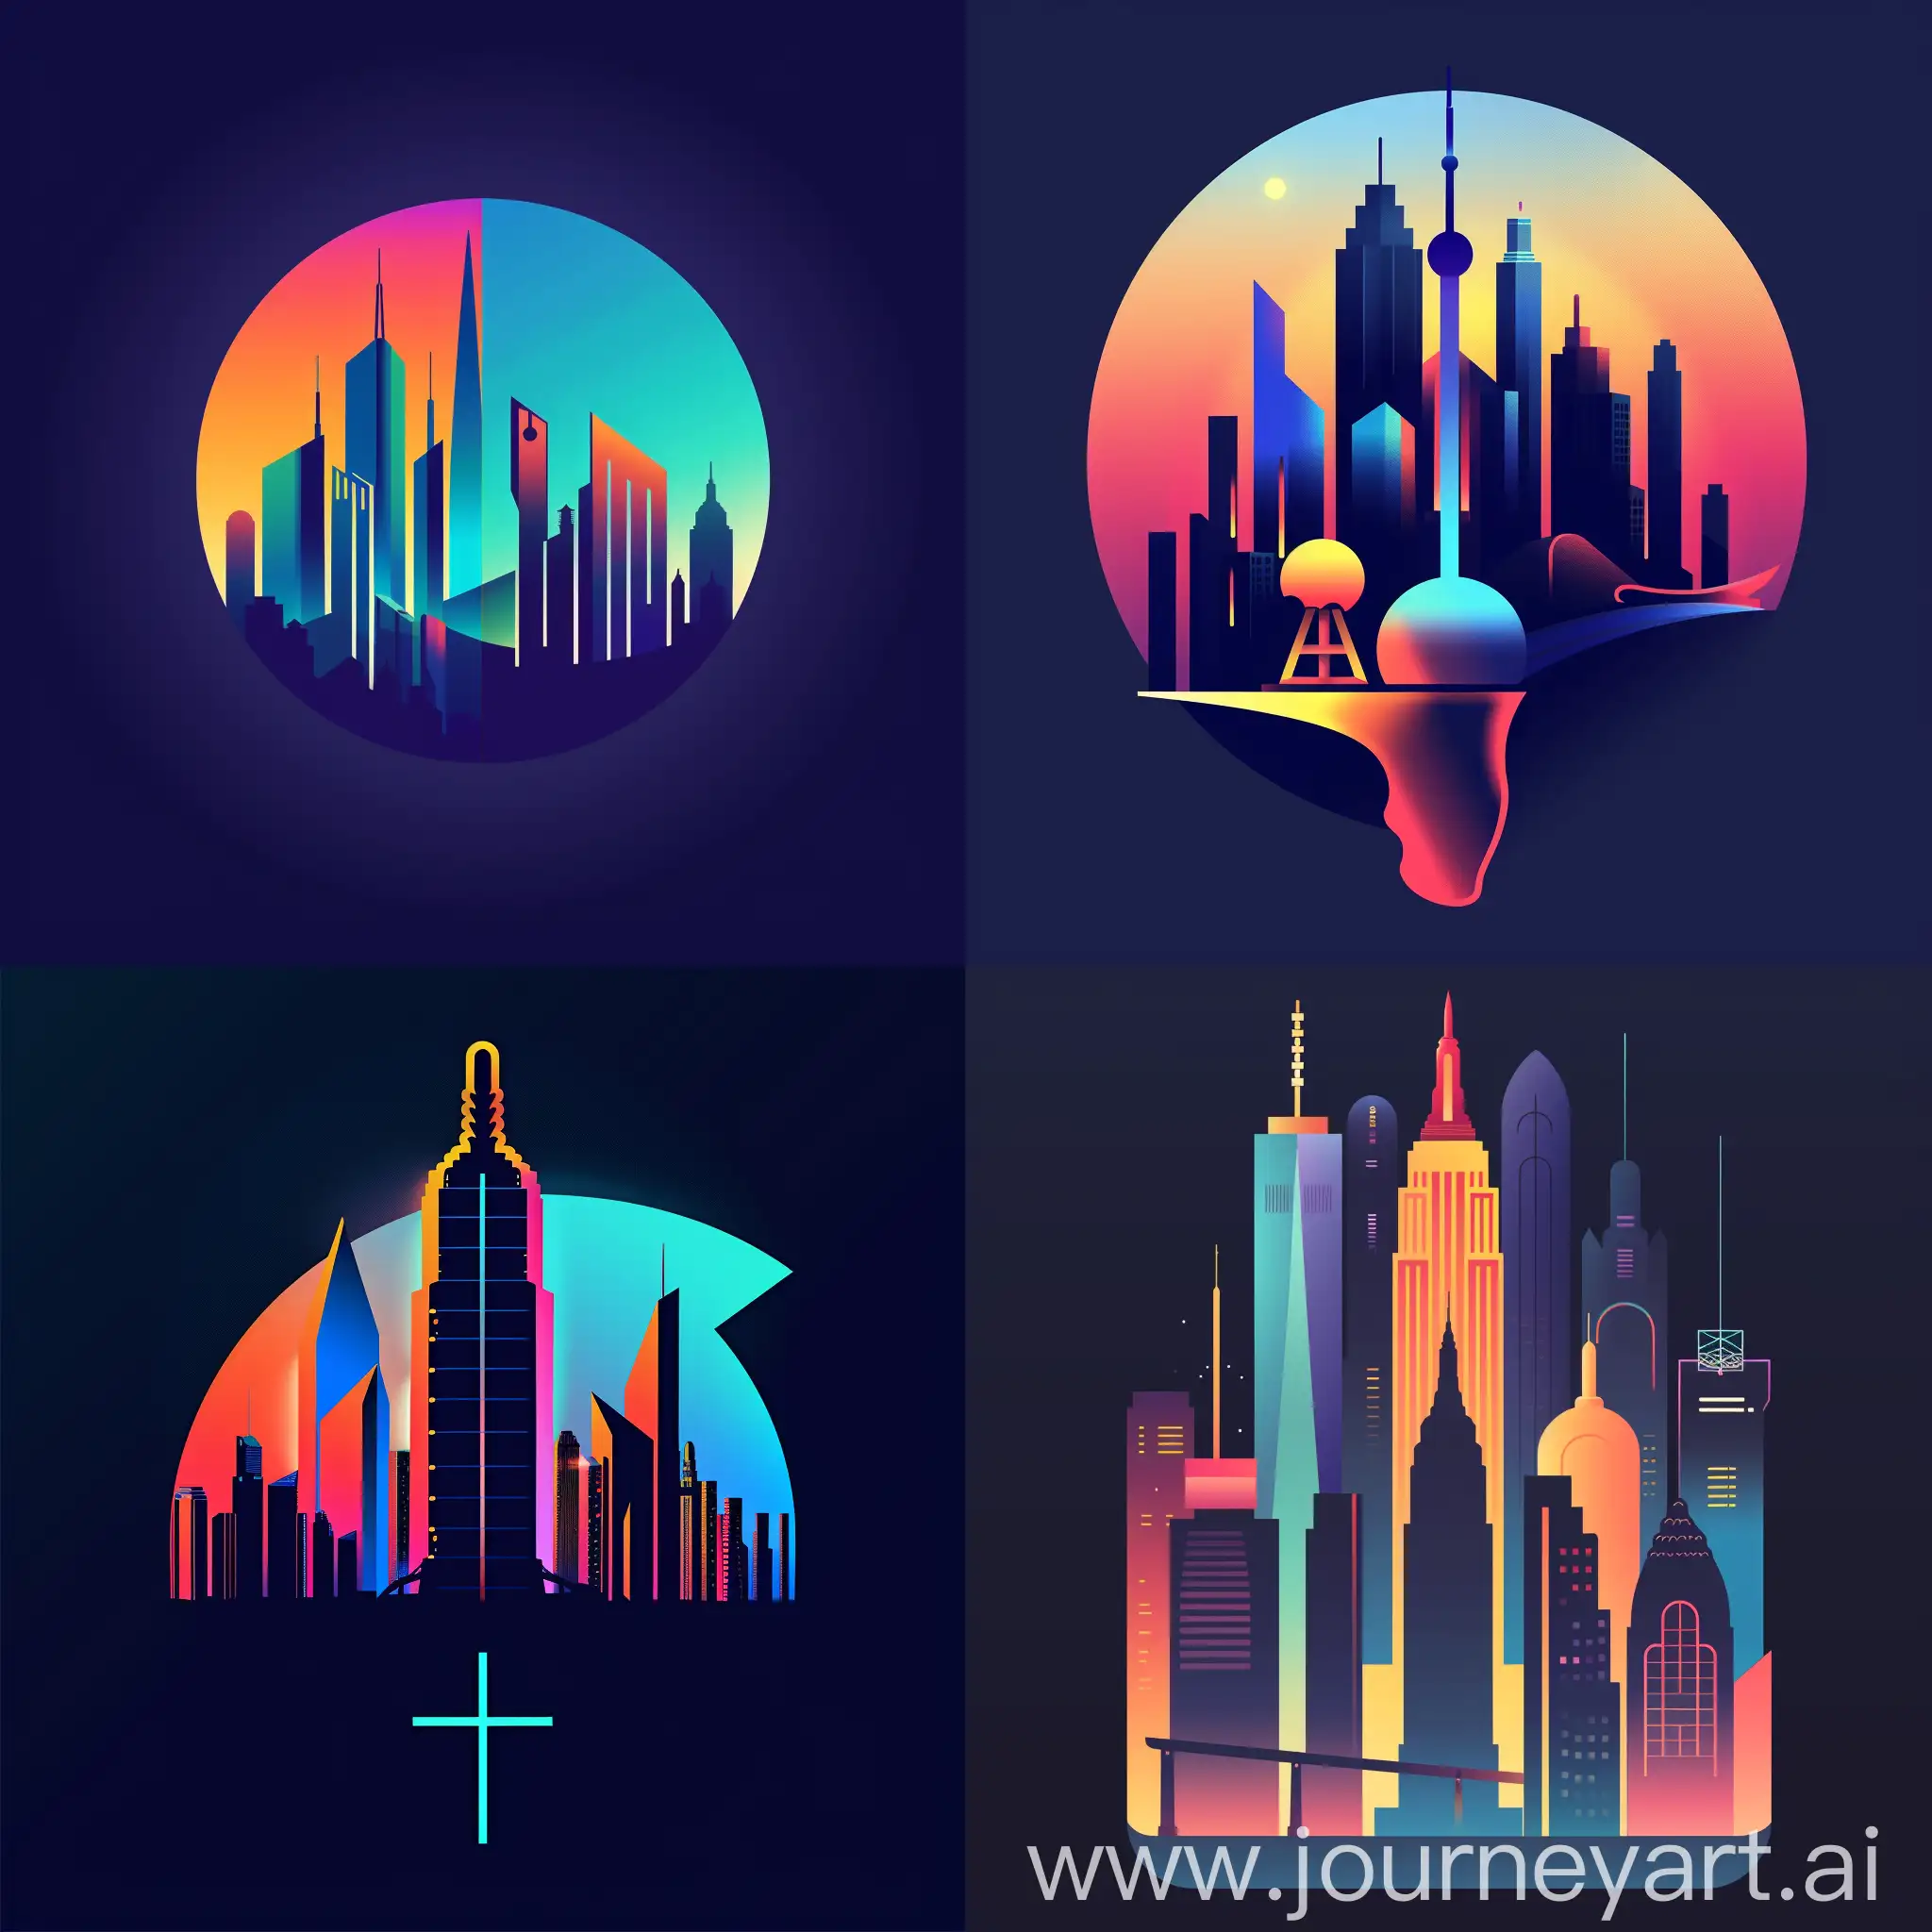 Urban-Exploration-Mobile-App-Logo-with-Skylines-and-Landmarks